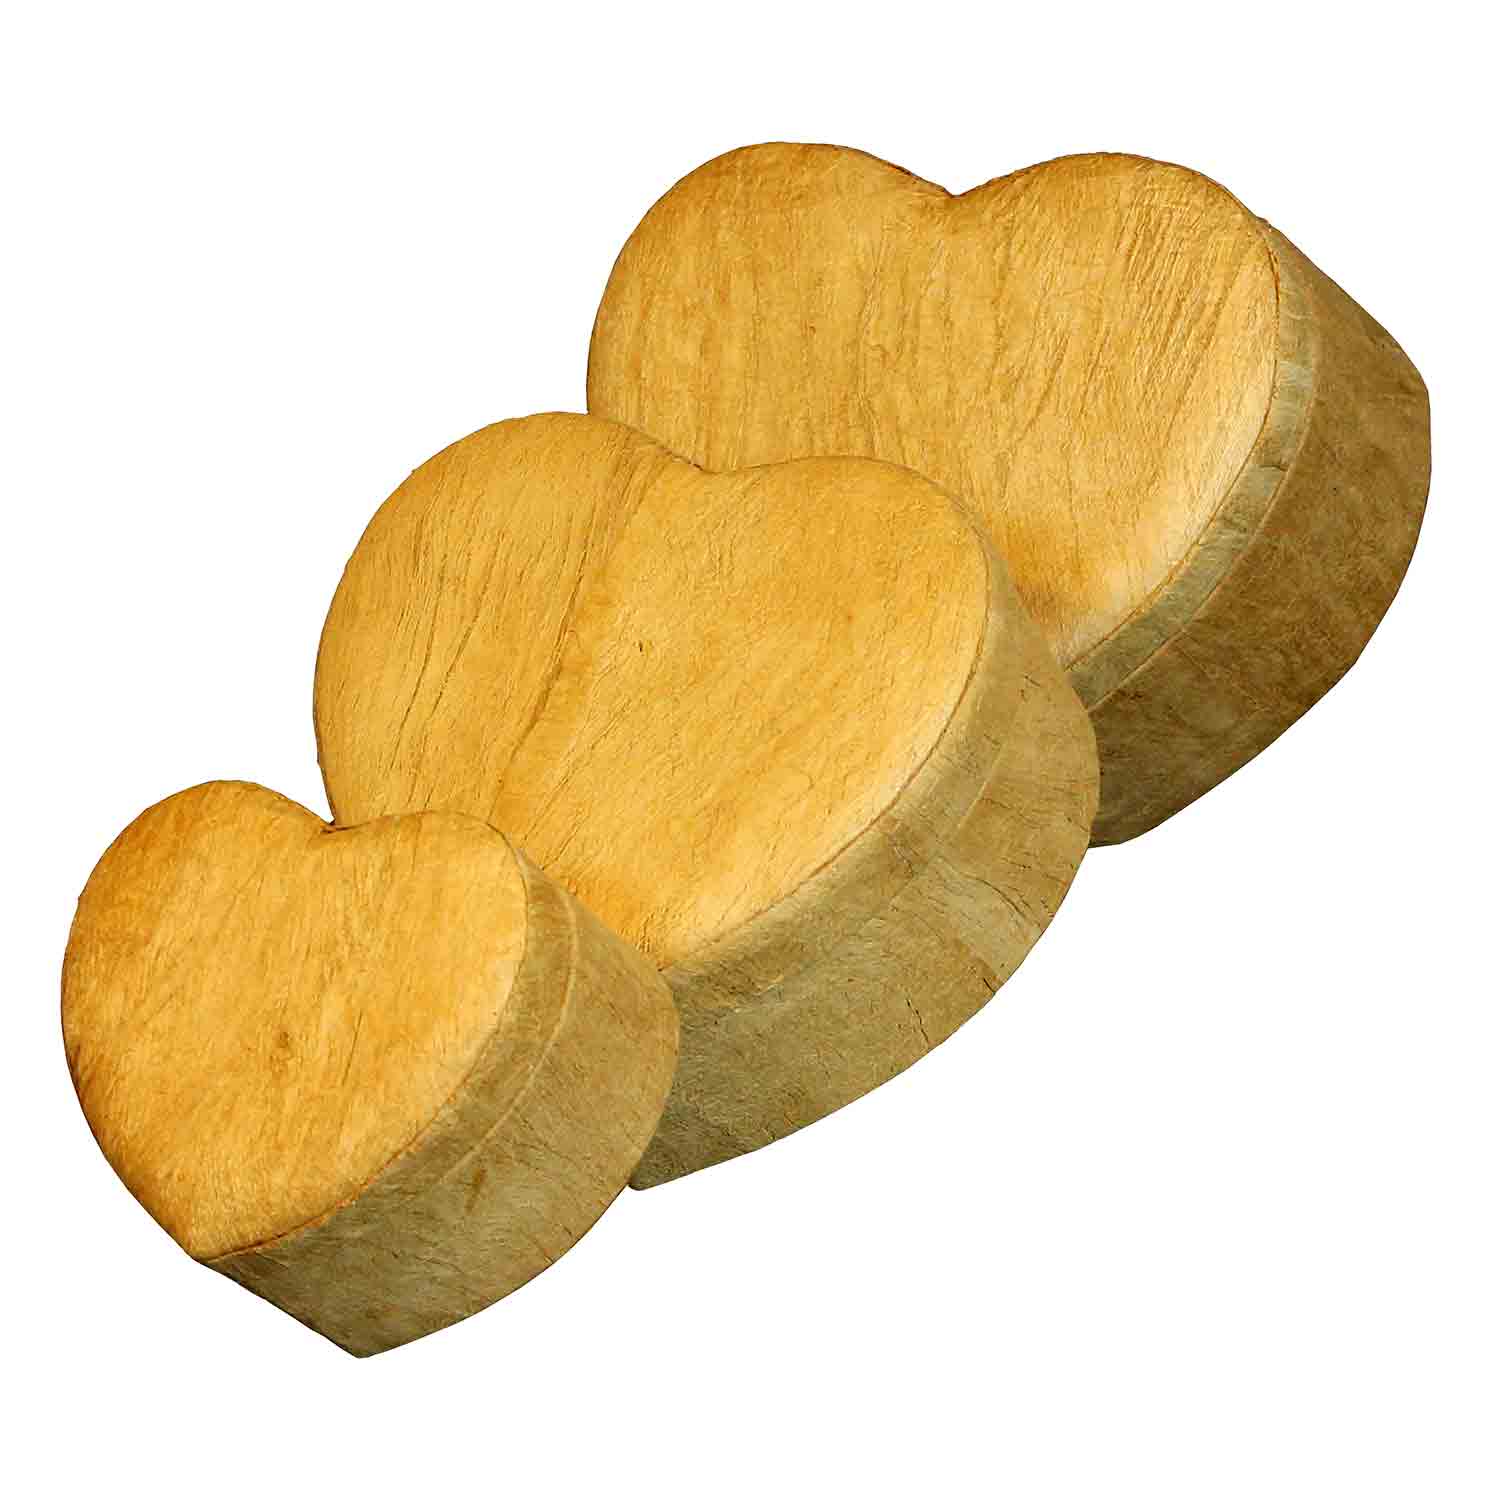 Heart Shaped Biodegradable Urn for Ashes in Wood Grain Large Collection